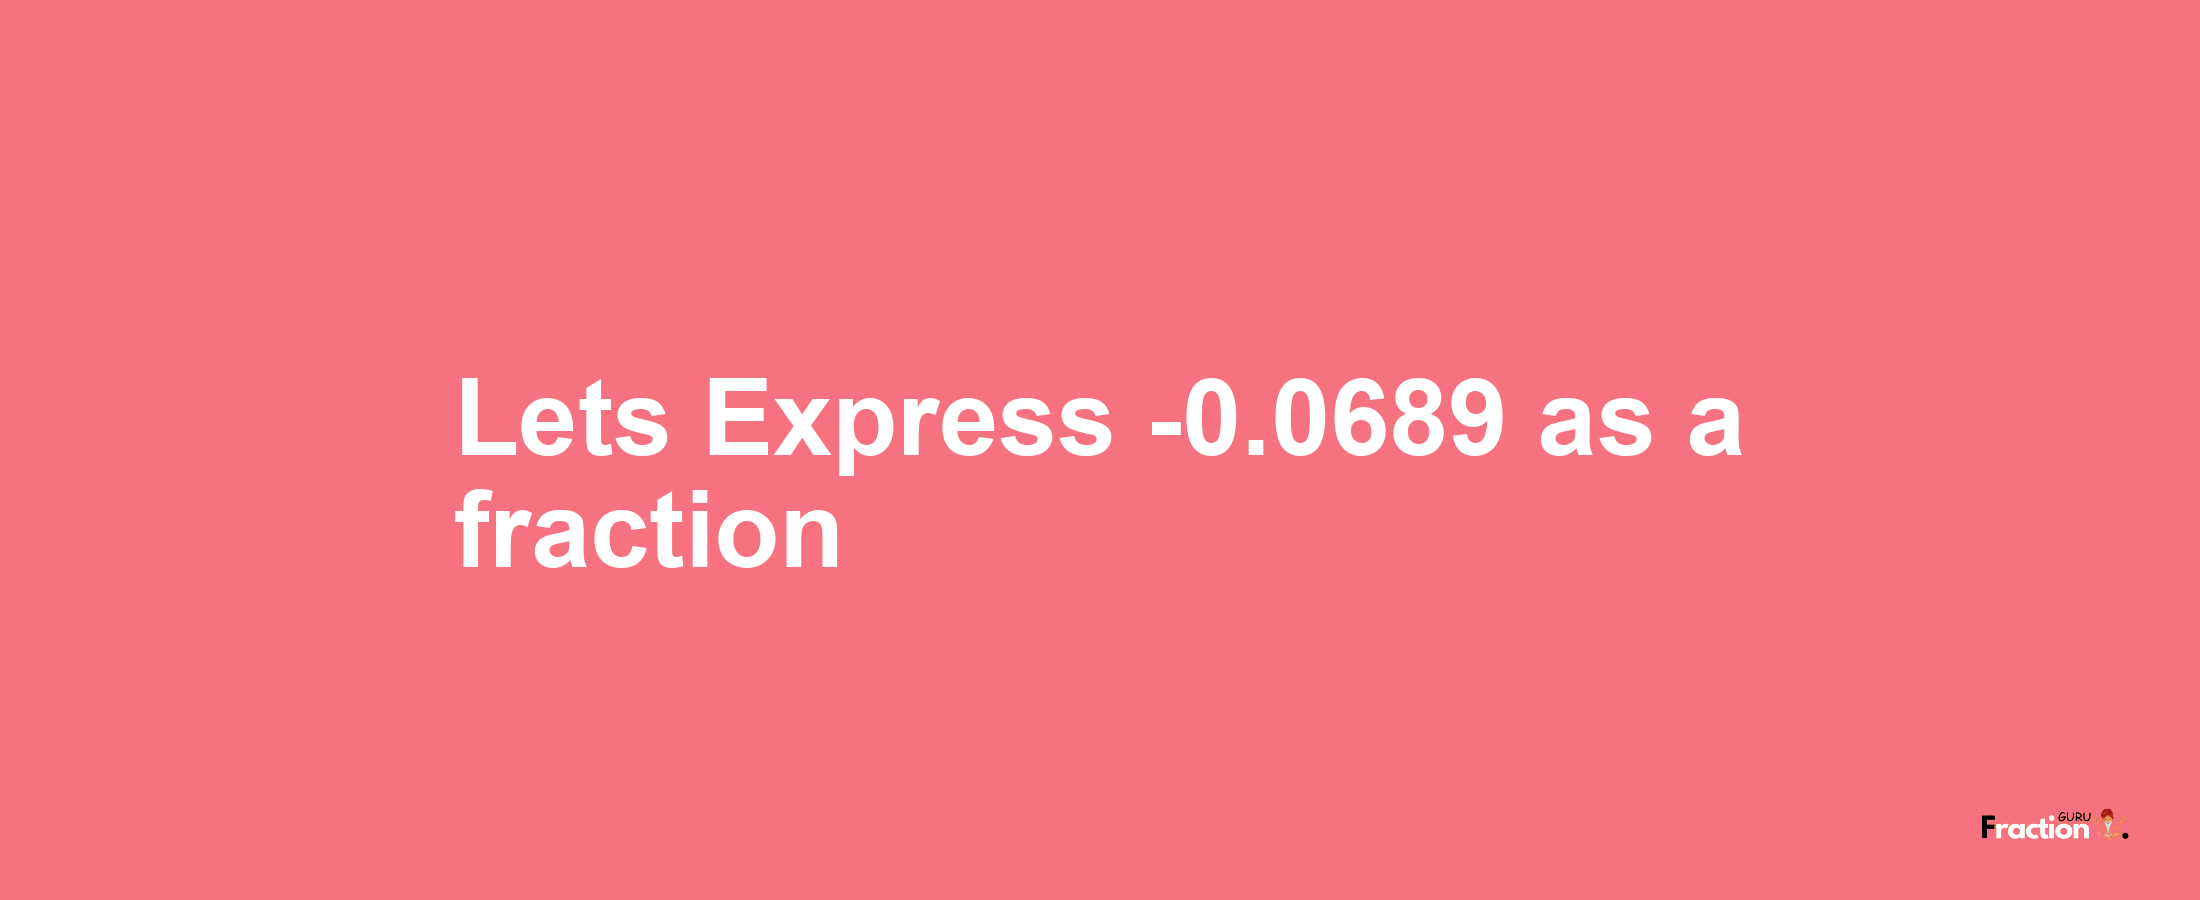 Lets Express -0.0689 as afraction